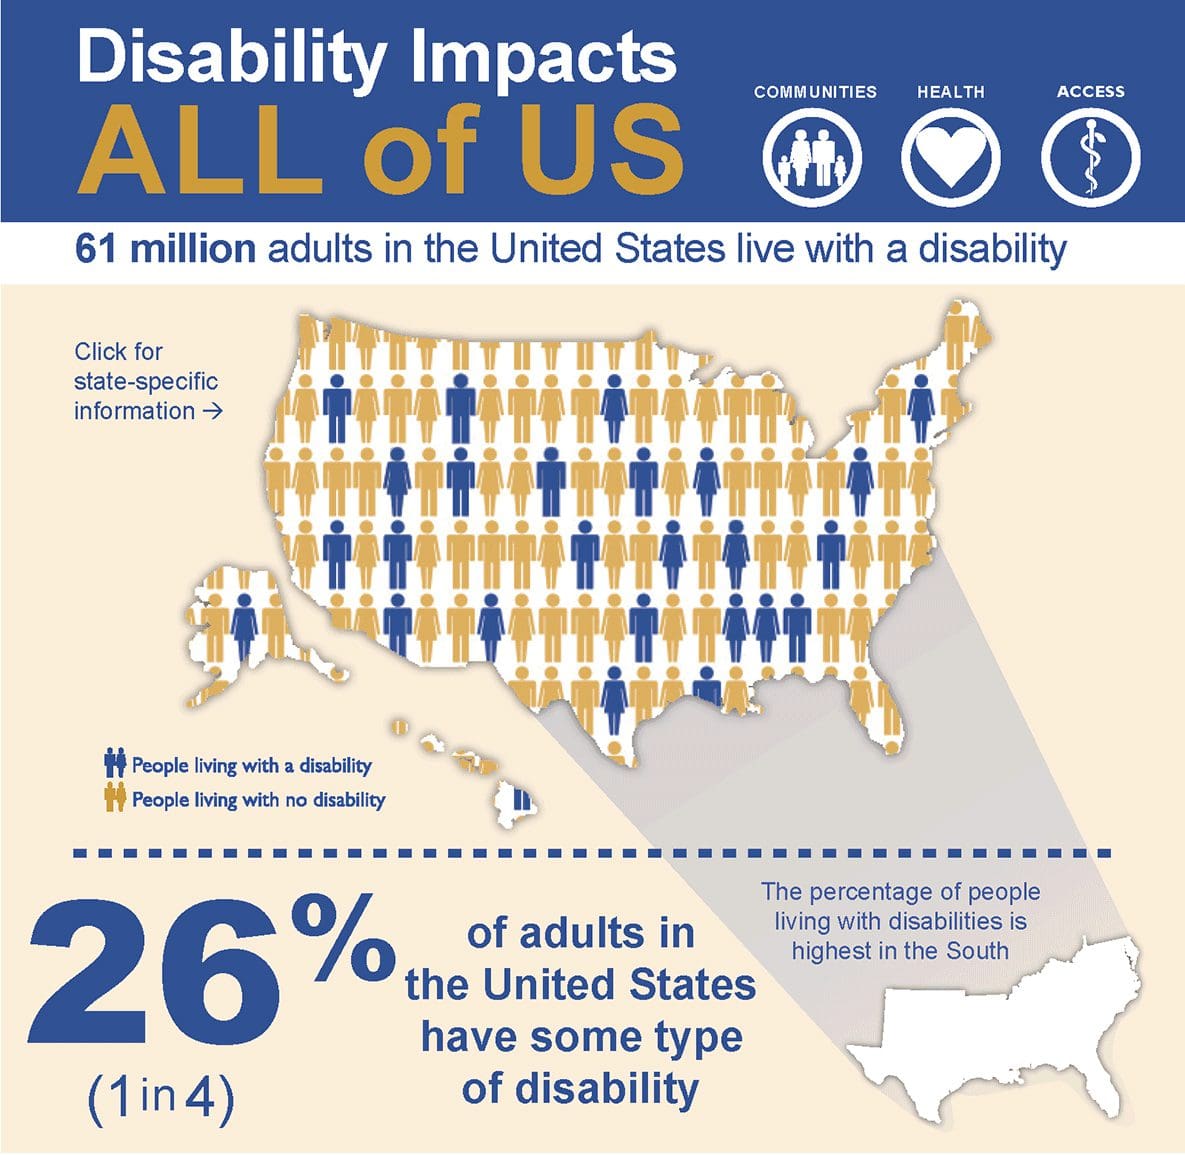 Disability Impacts All of Us (CDC)